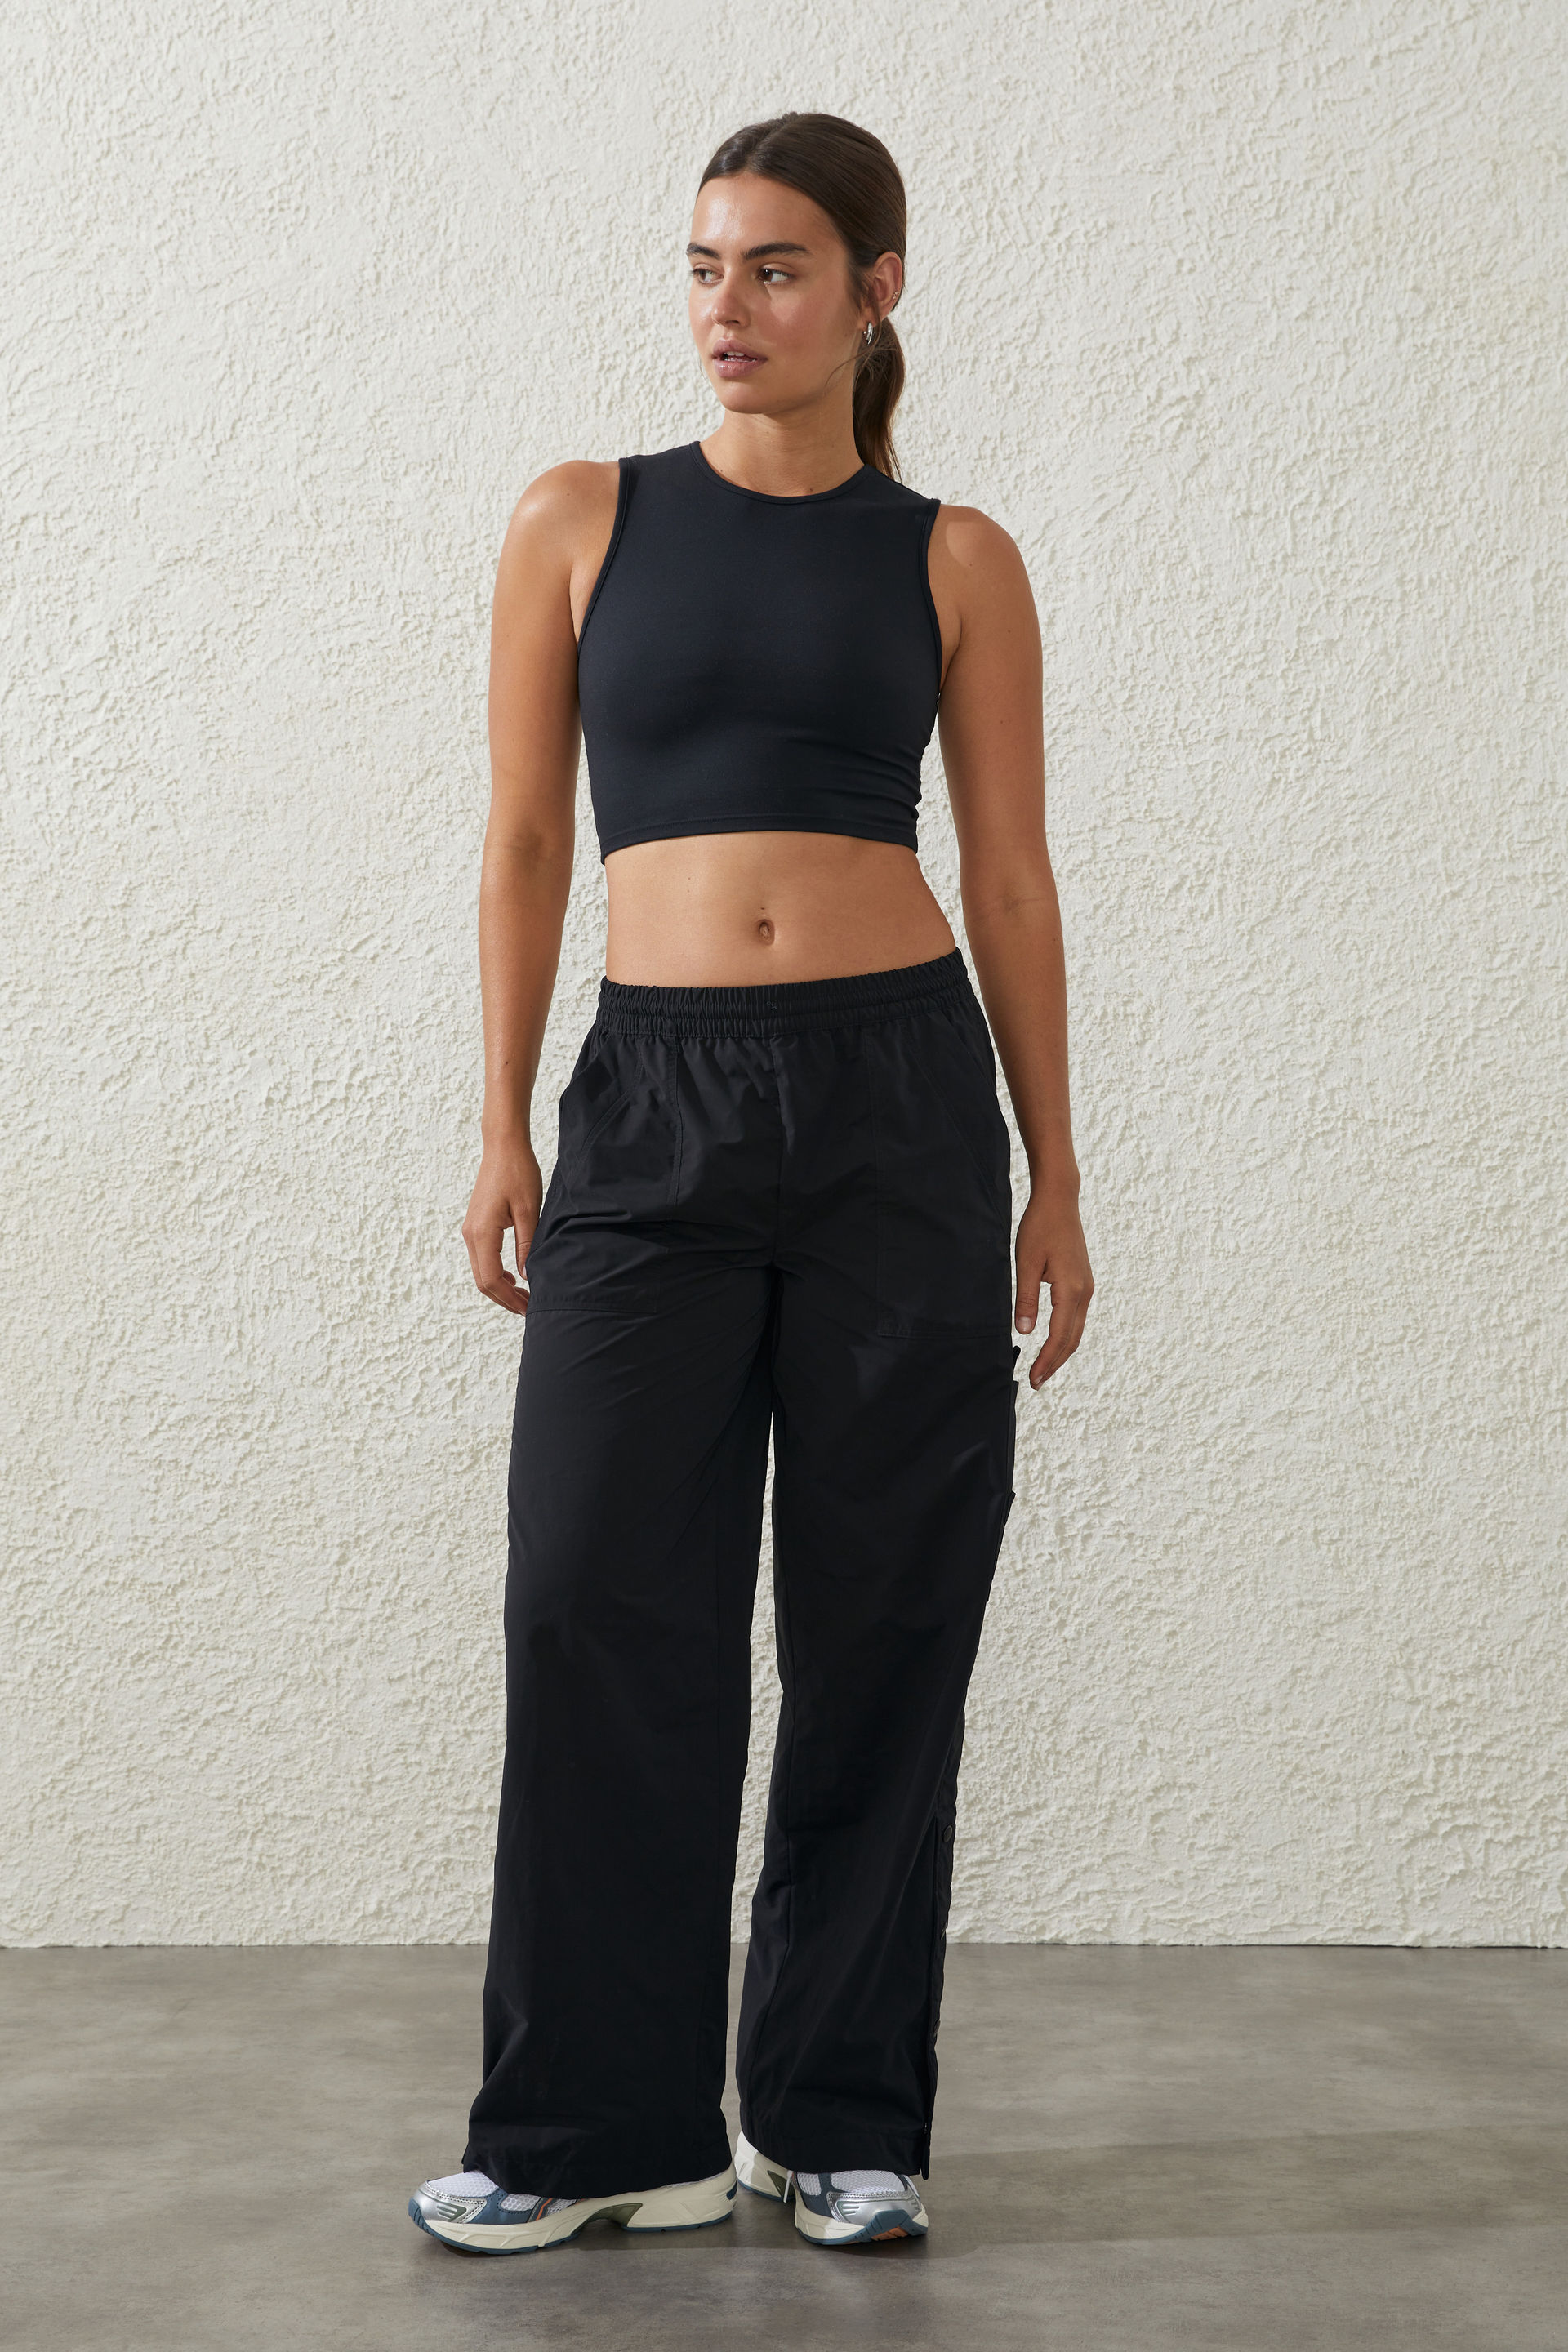 Fleece Lined Full Length Flare Pants by Cotton On Body Active